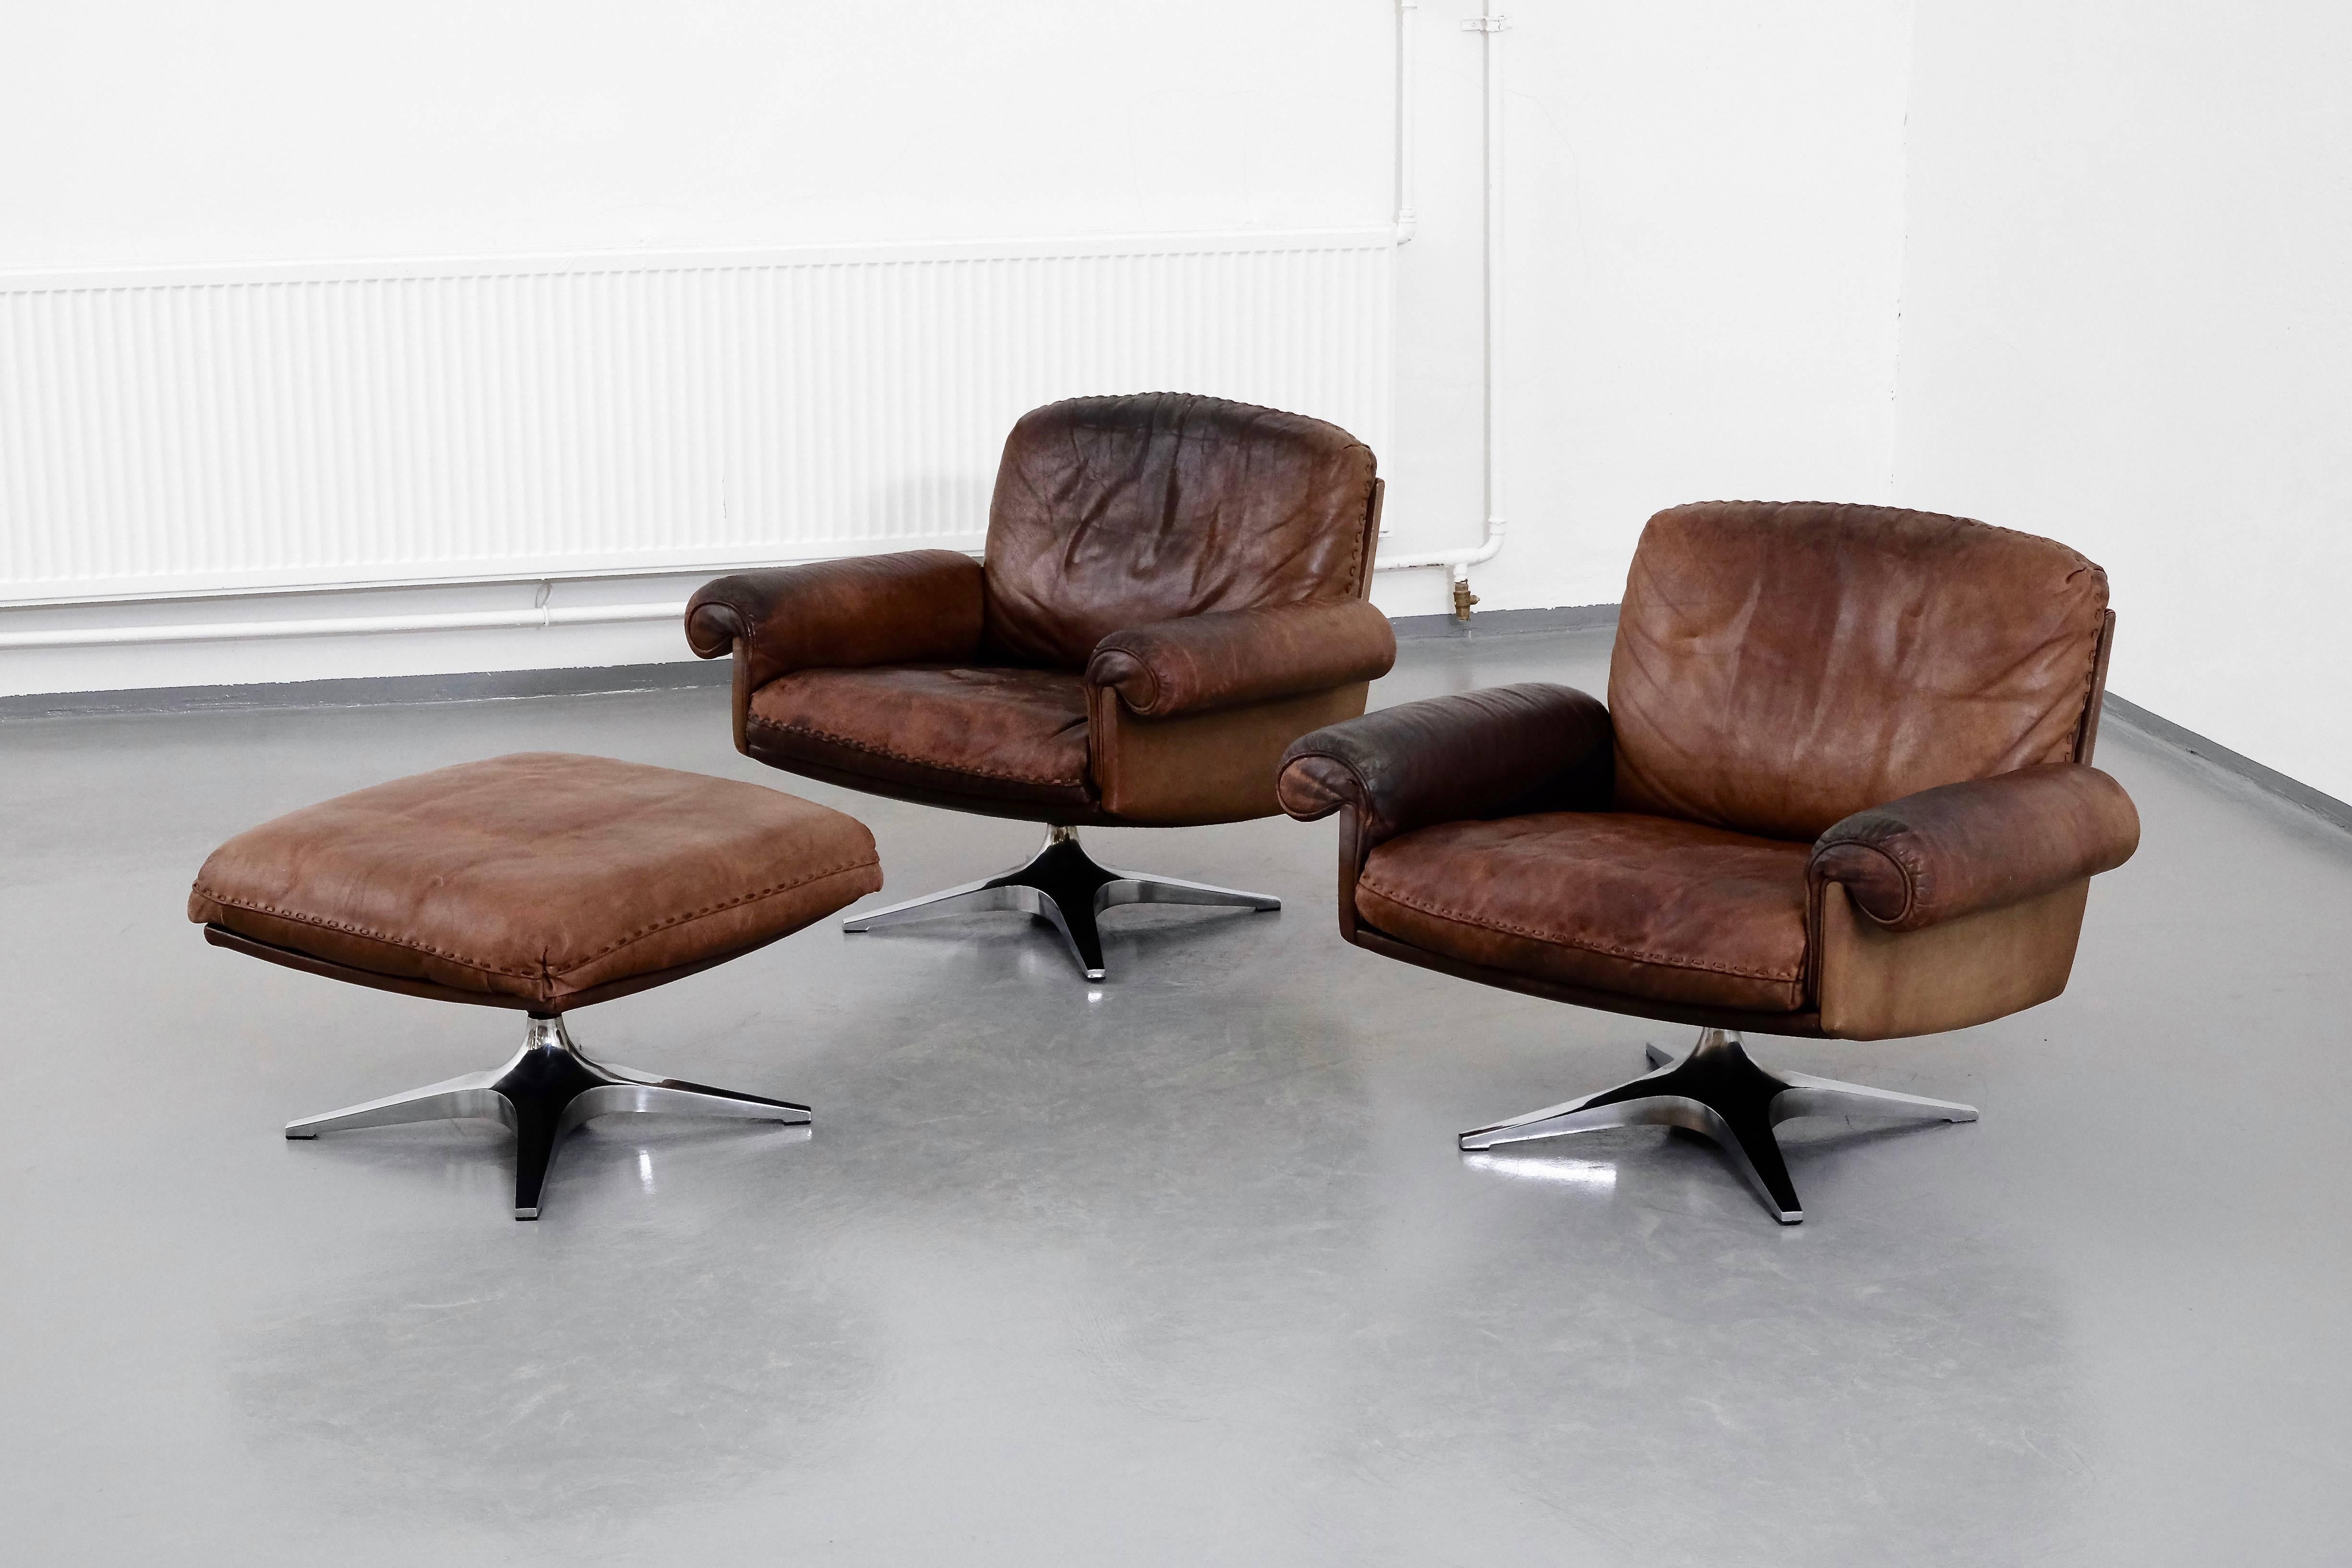 A stunning set of two lounge chairs and one ottoman, model DS31, produced by the Swiss manufacturer de Sede. The patina on the leather is magnificent.

Ottoman measurements:
Length 50cm
Width 50cm
Height 35cm